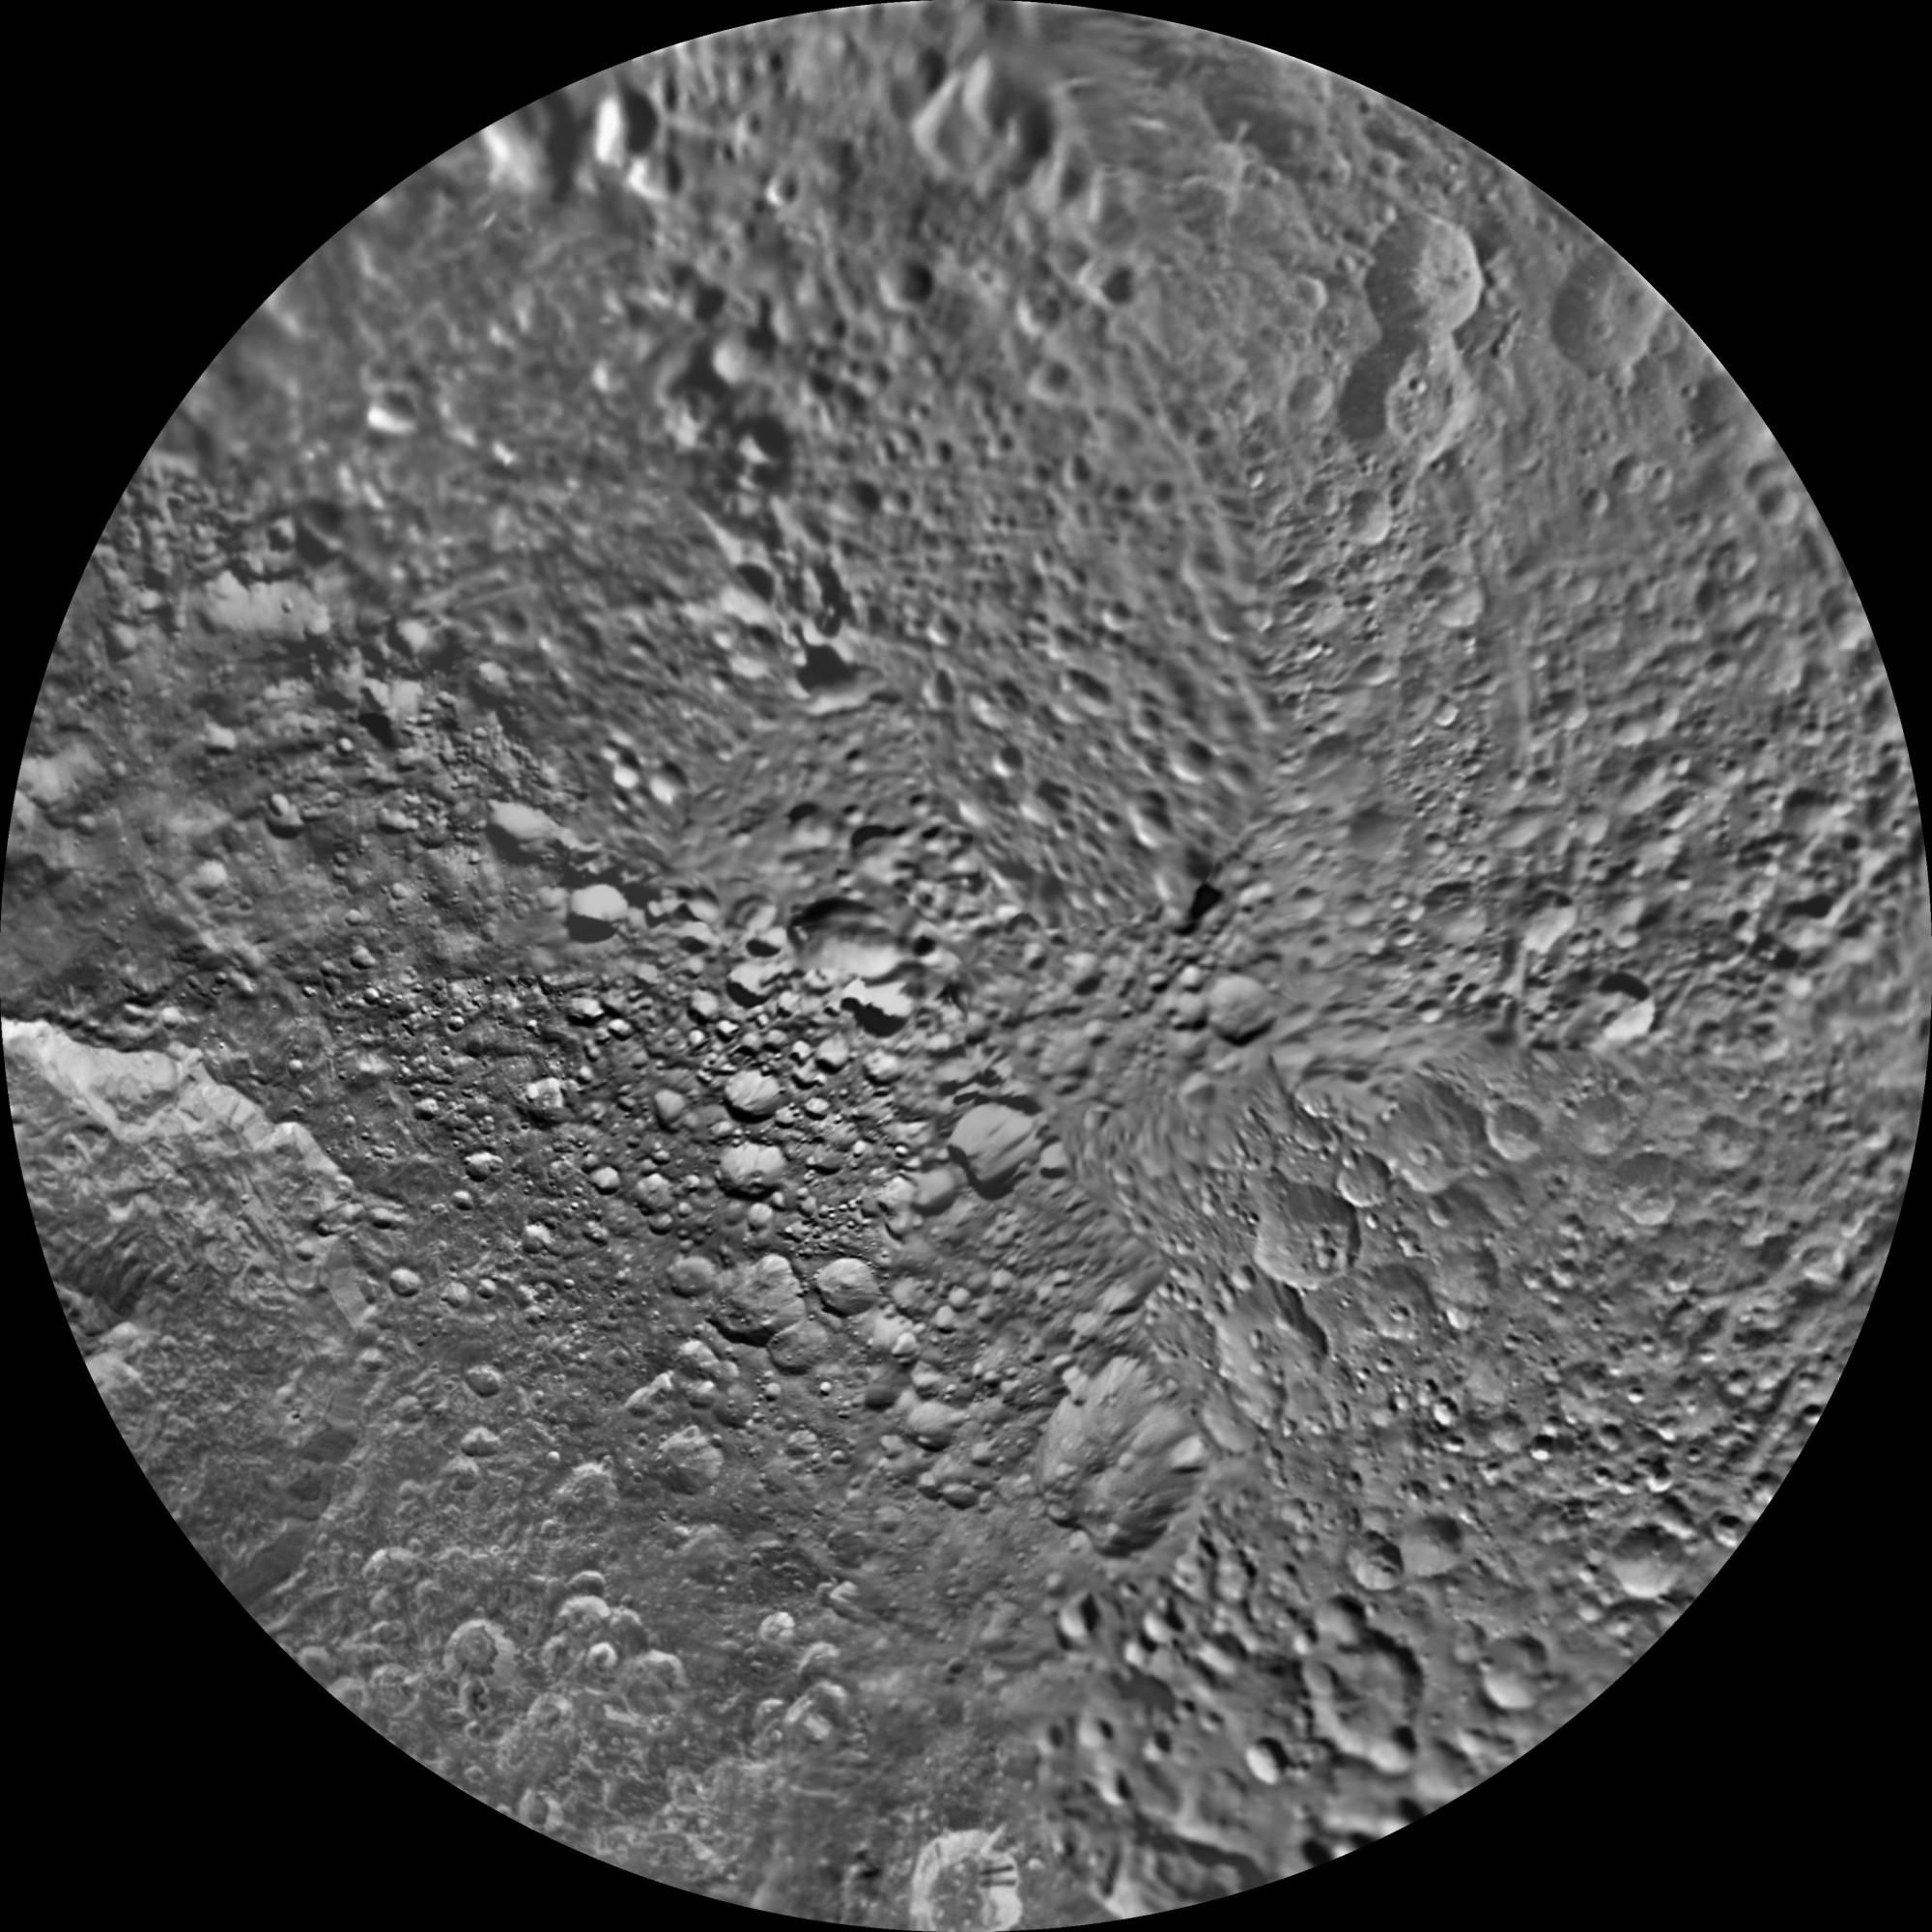 The southern hemisphere of Saturn's moon Mimas is seen in these polar stereographic maps, mosaicked from the best-available Cassini and Voyager images.